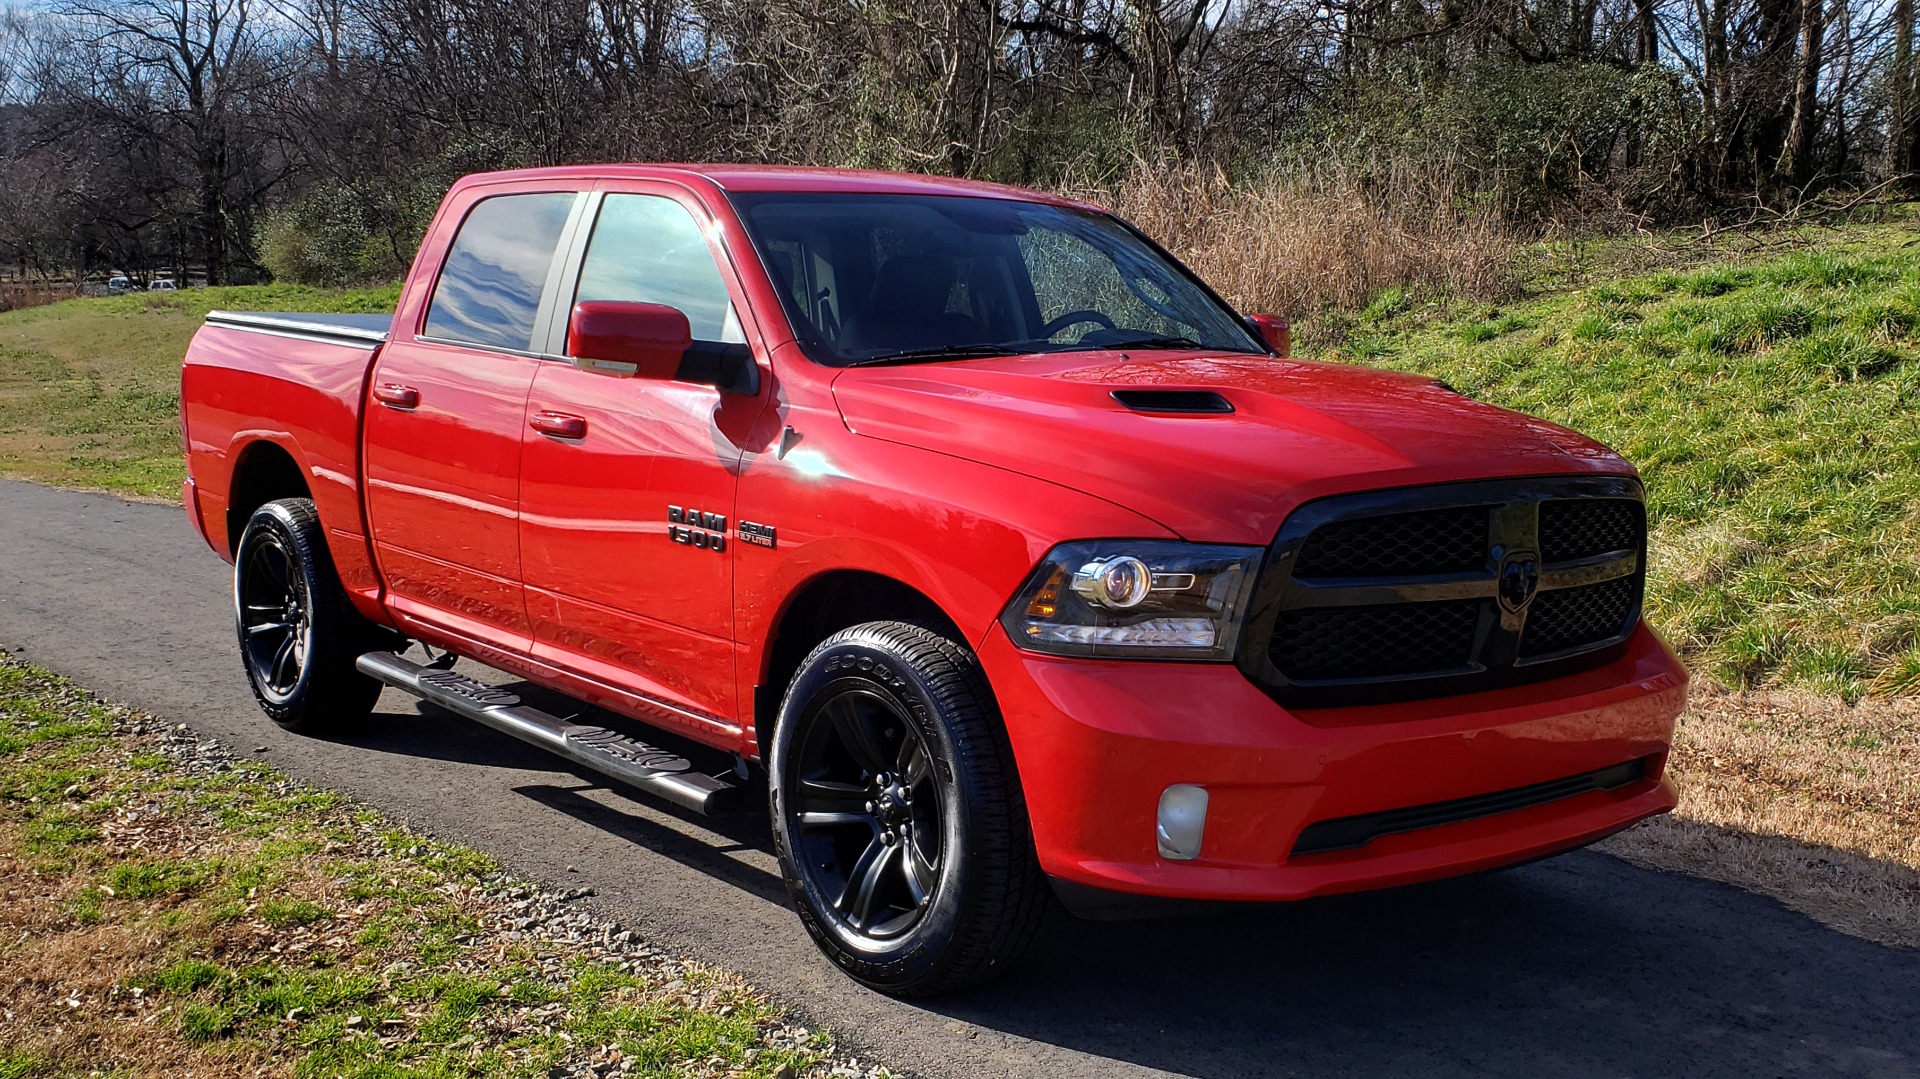 Used 2017 Ram 1500 NIGHT EDITION CREWCAB 4X4 / NAV / PARKSENSE for sale Sold at Formula Imports in Charlotte NC 28227 4